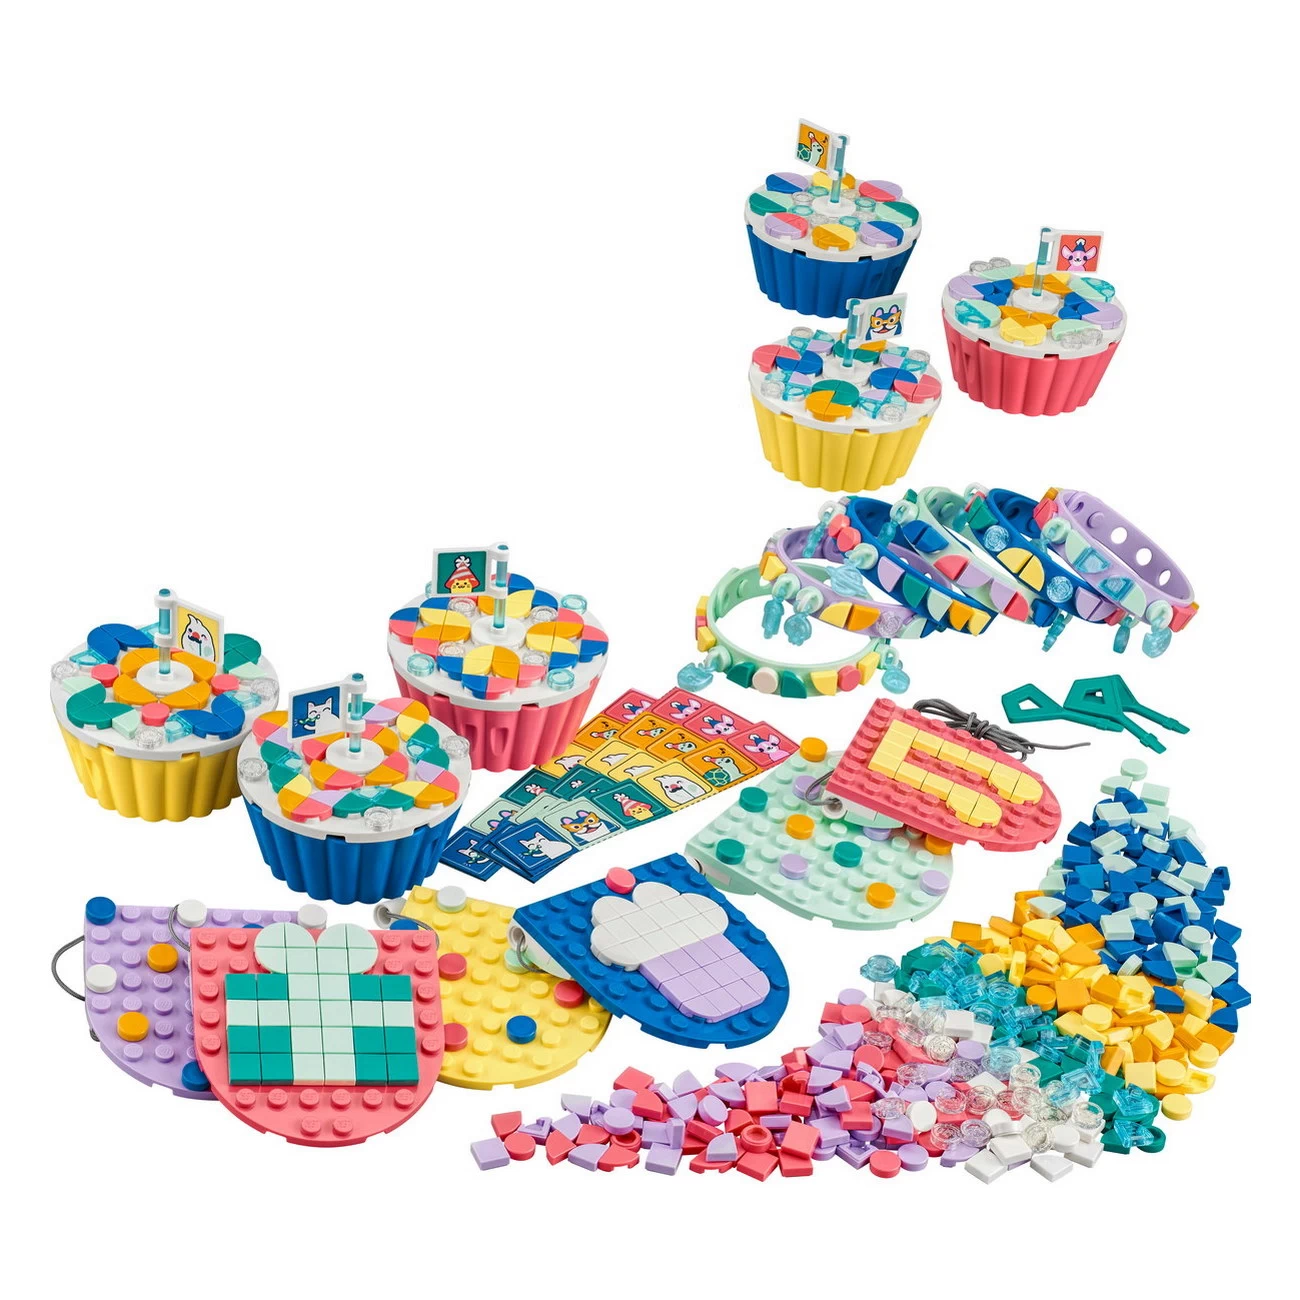 Ultimatives Partyset (41806)